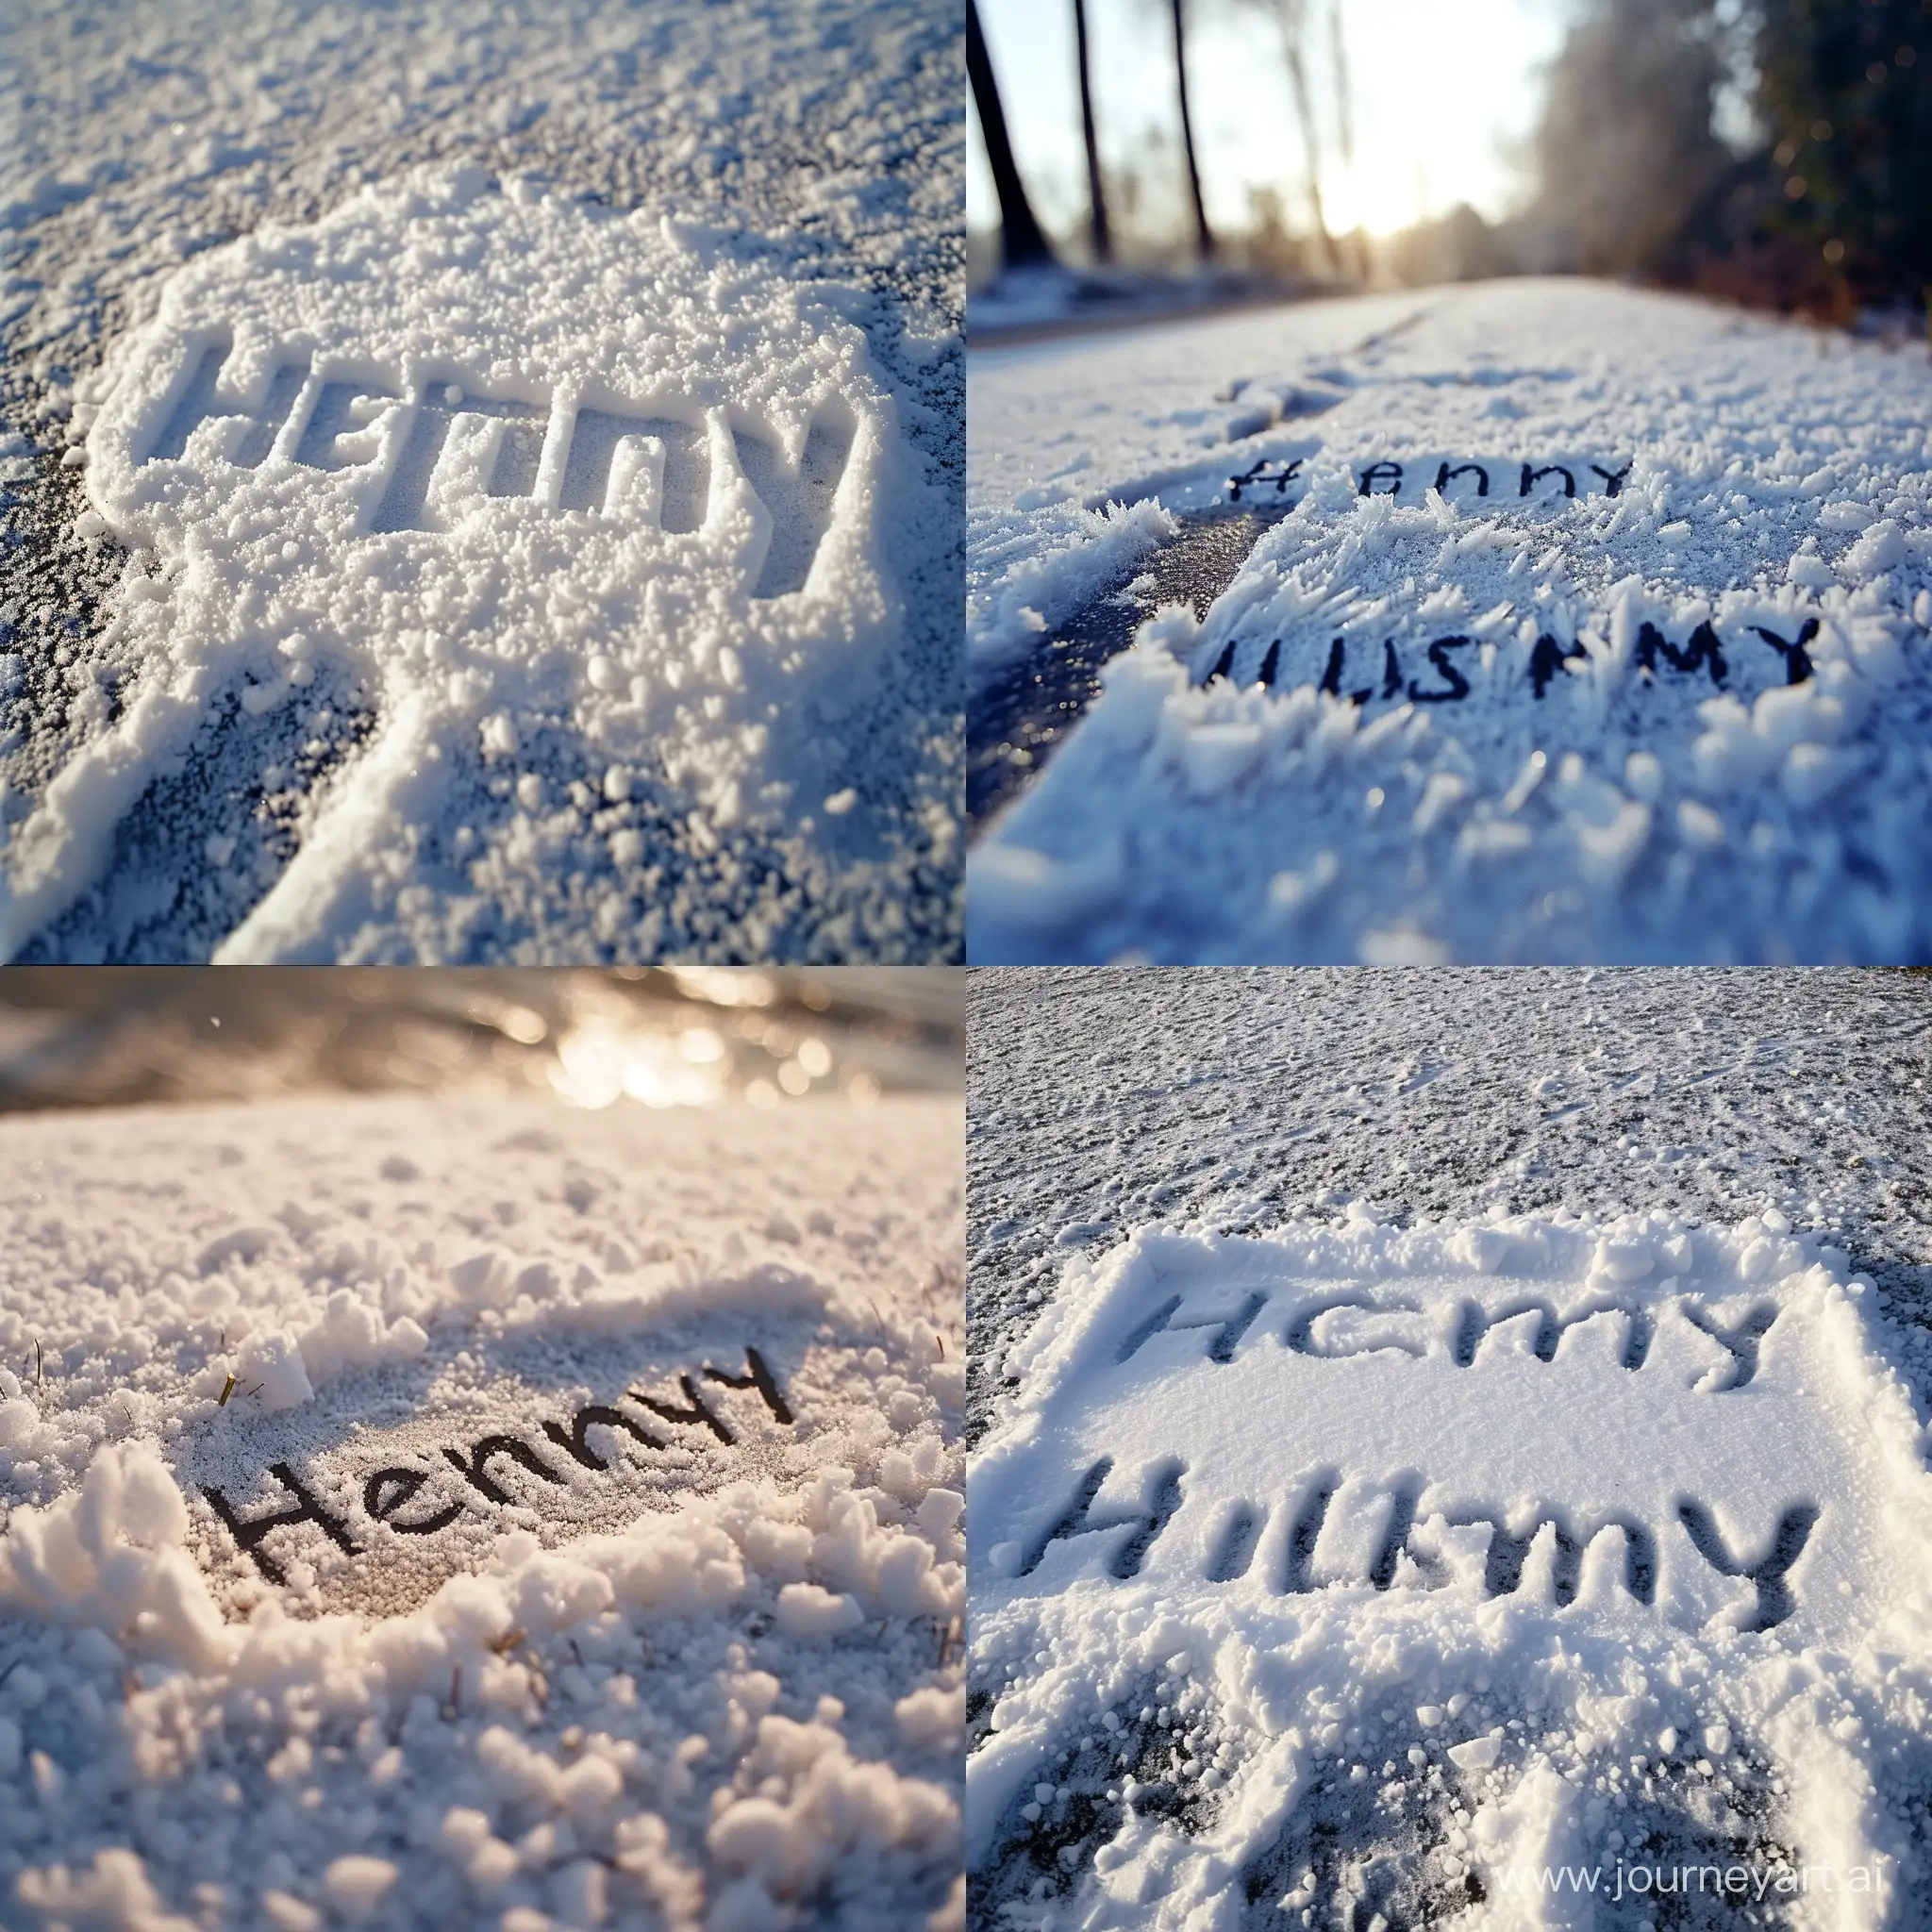 Winter-Fun-Personalized-Snow-Art-Featuring-the-Names-Henry-and-UCLISMY